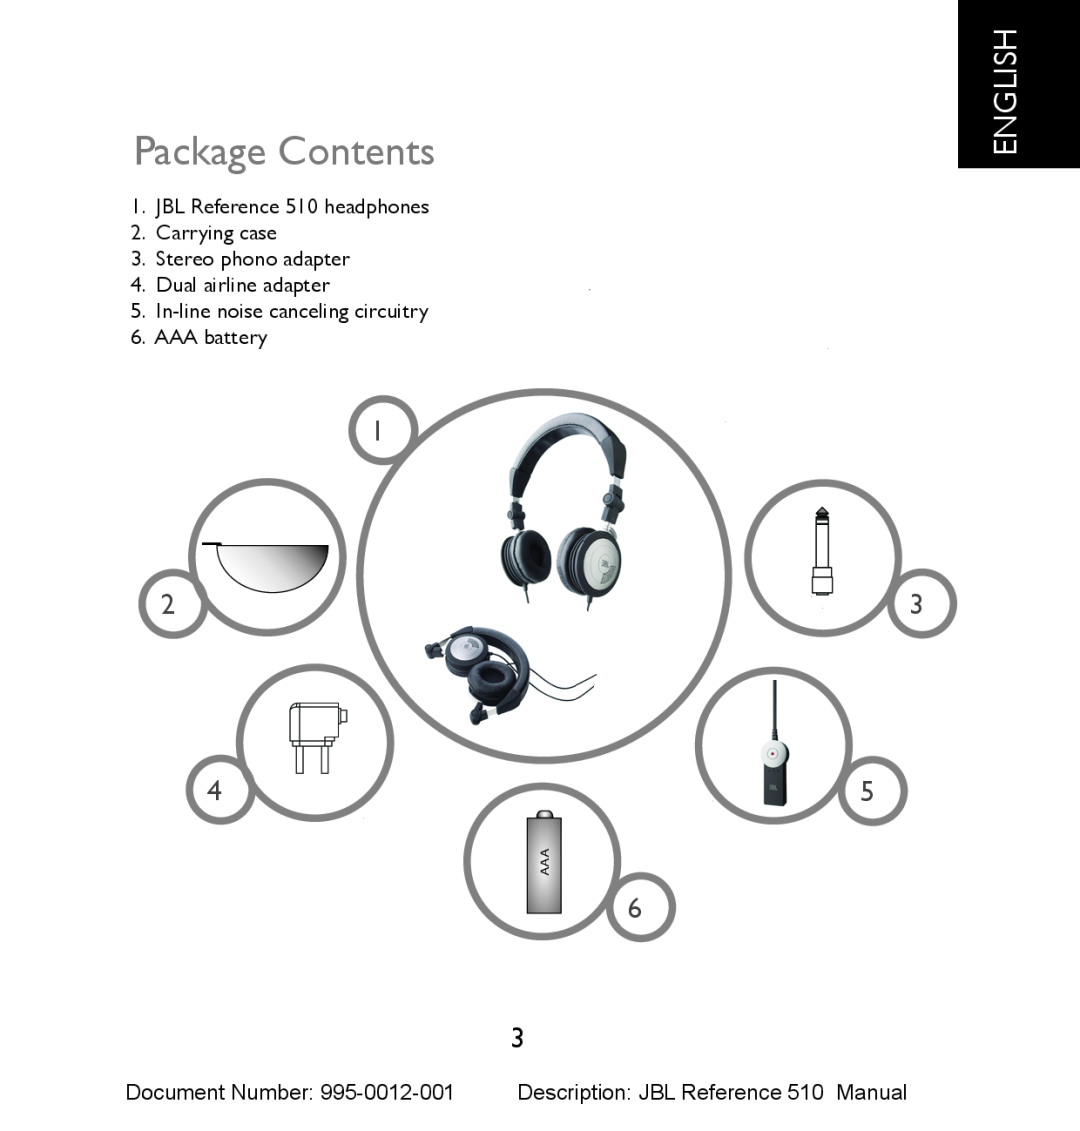 JBL 510 manual Package Contents, English, 1 2 